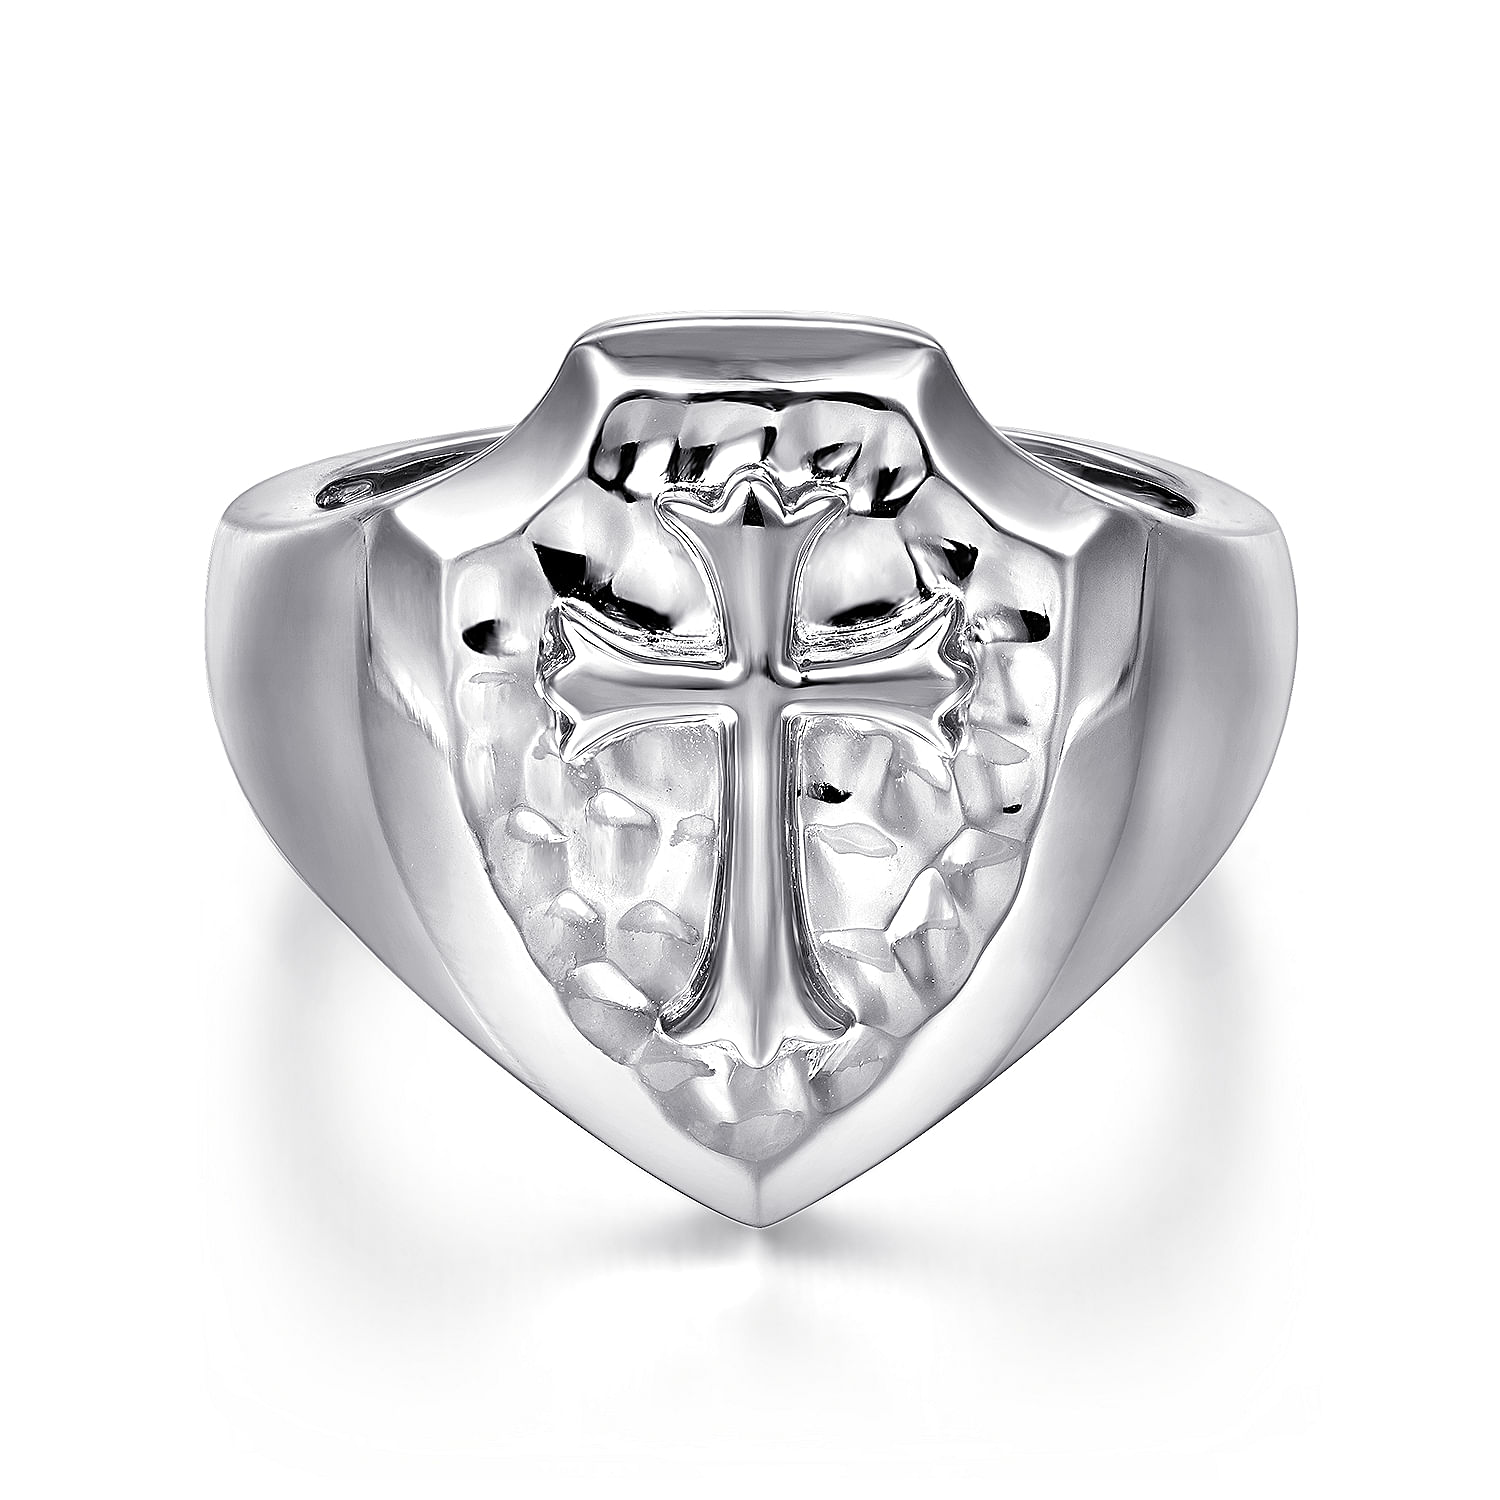 Wide 925 Sterling Silver Cross Signet Ring in High Polished Finish